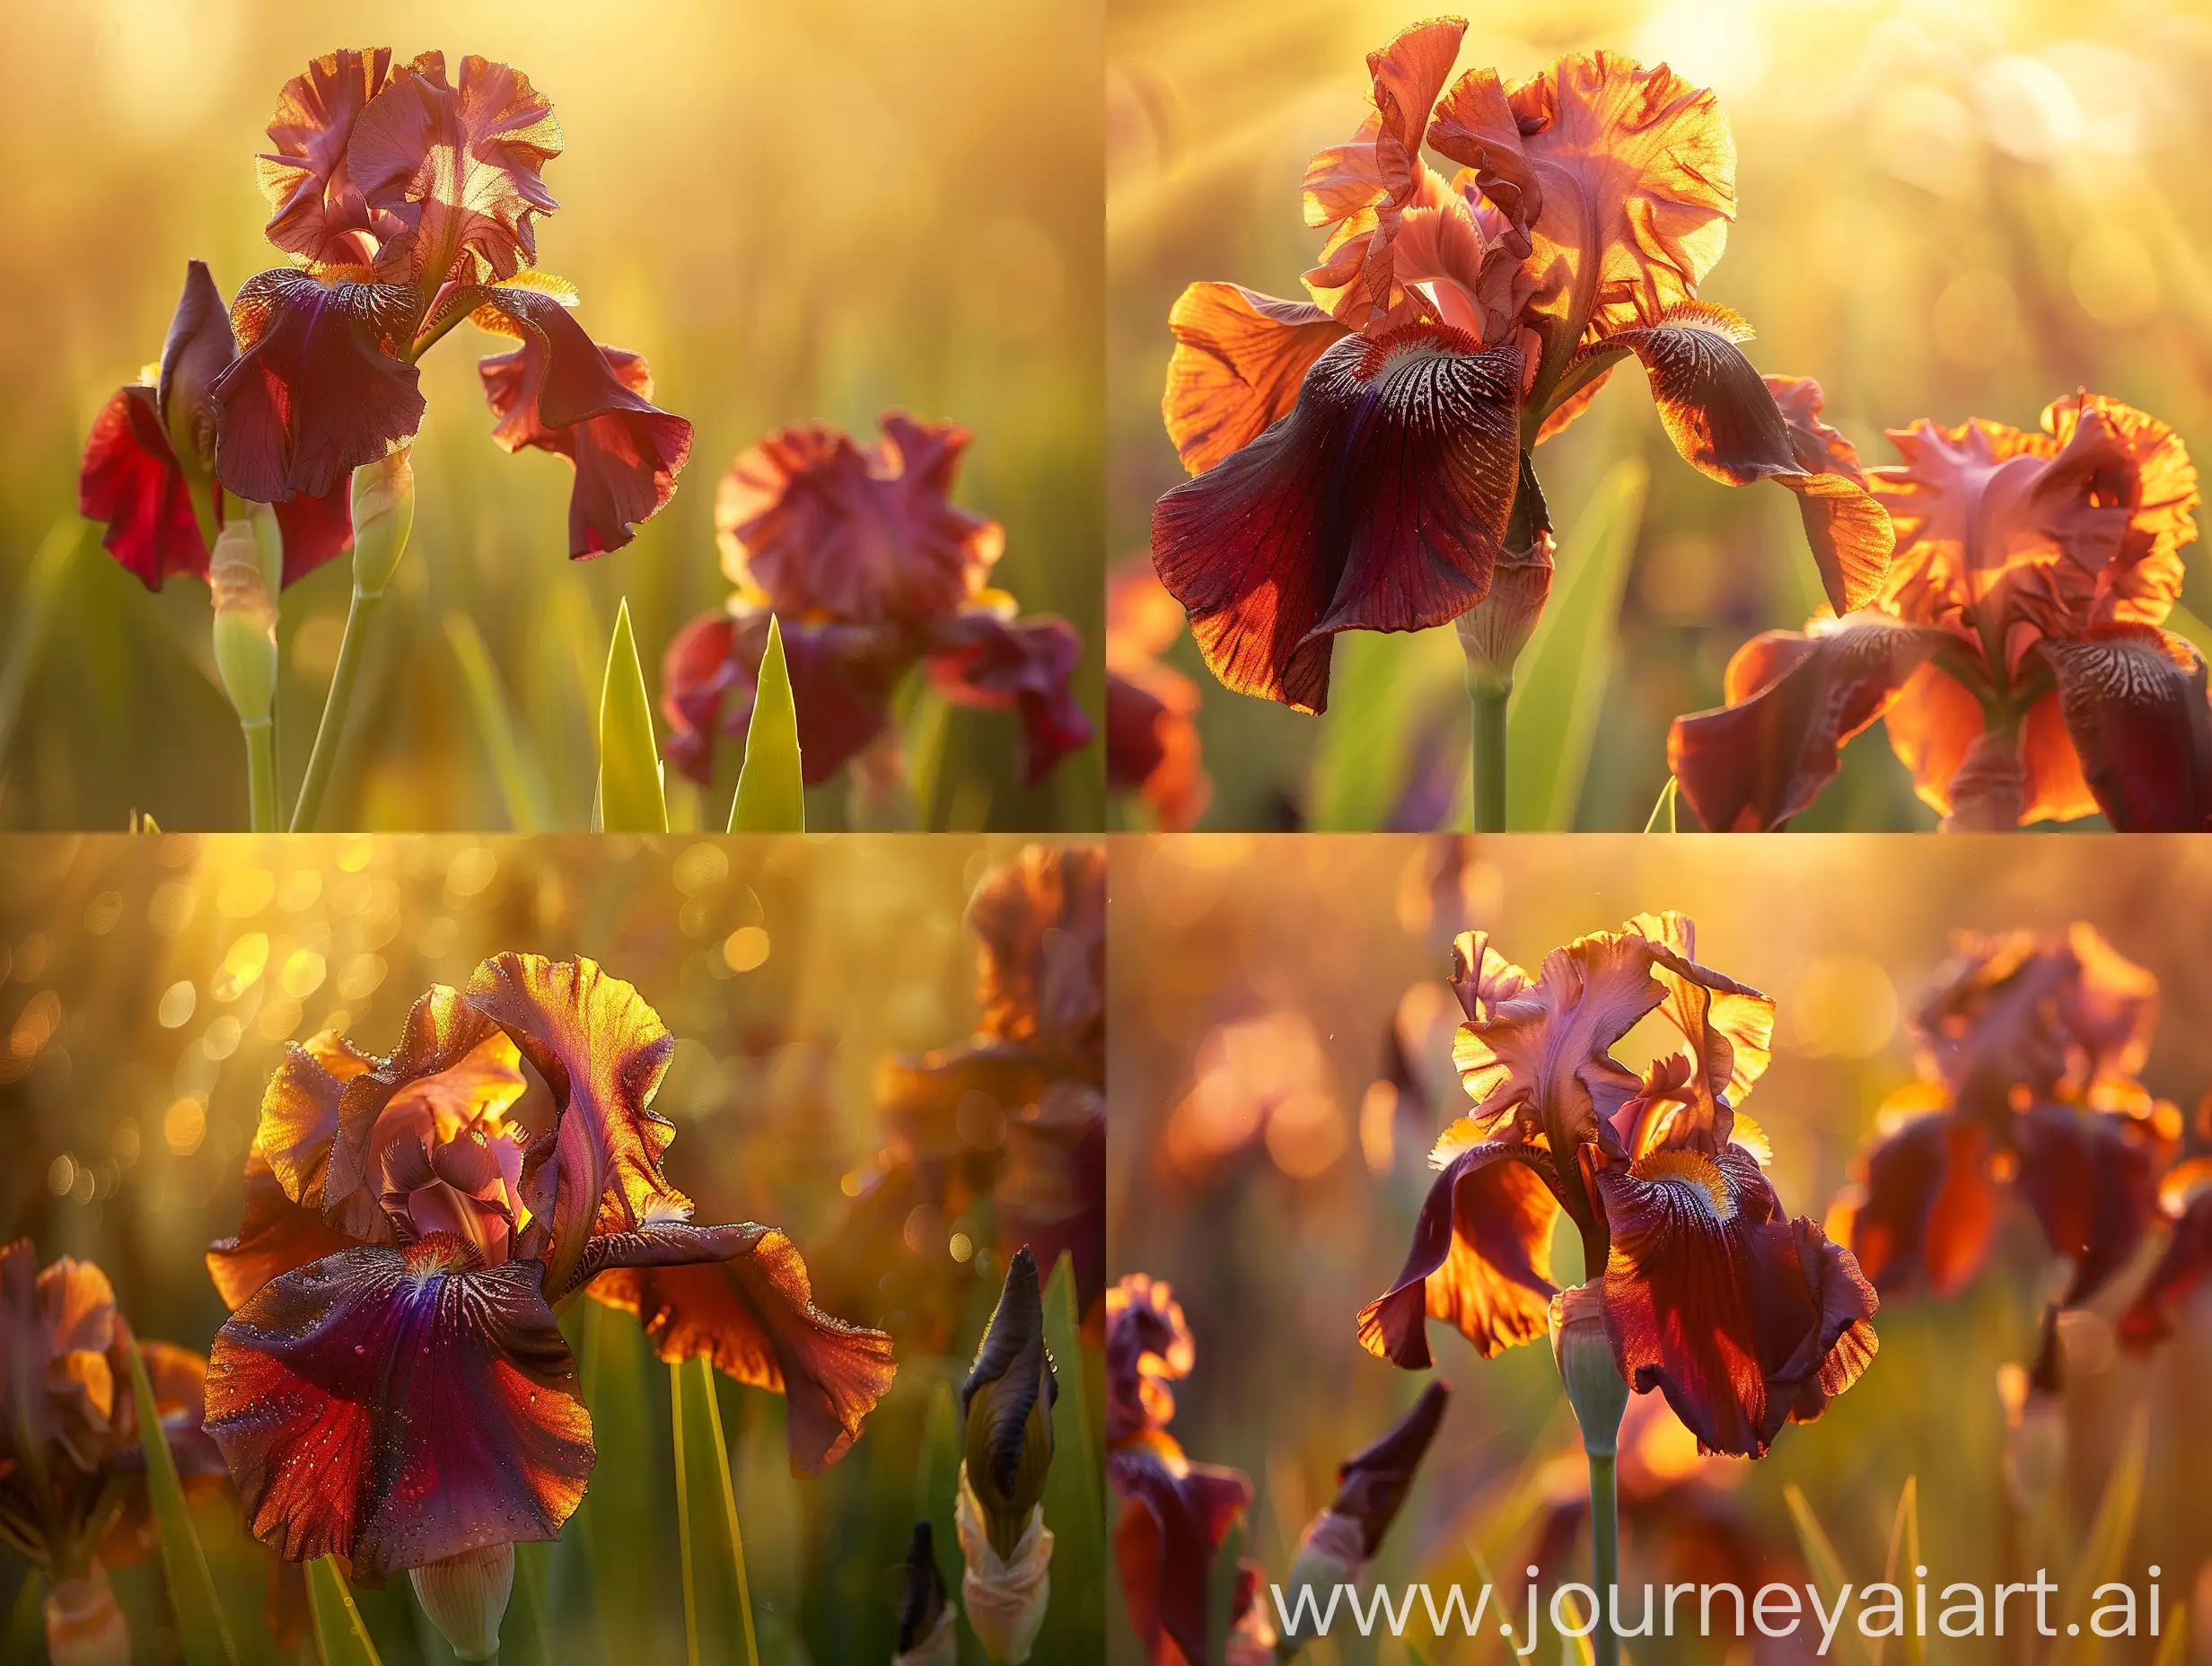 Captivating-Red-Ember-Iris-in-Warm-Sunlight